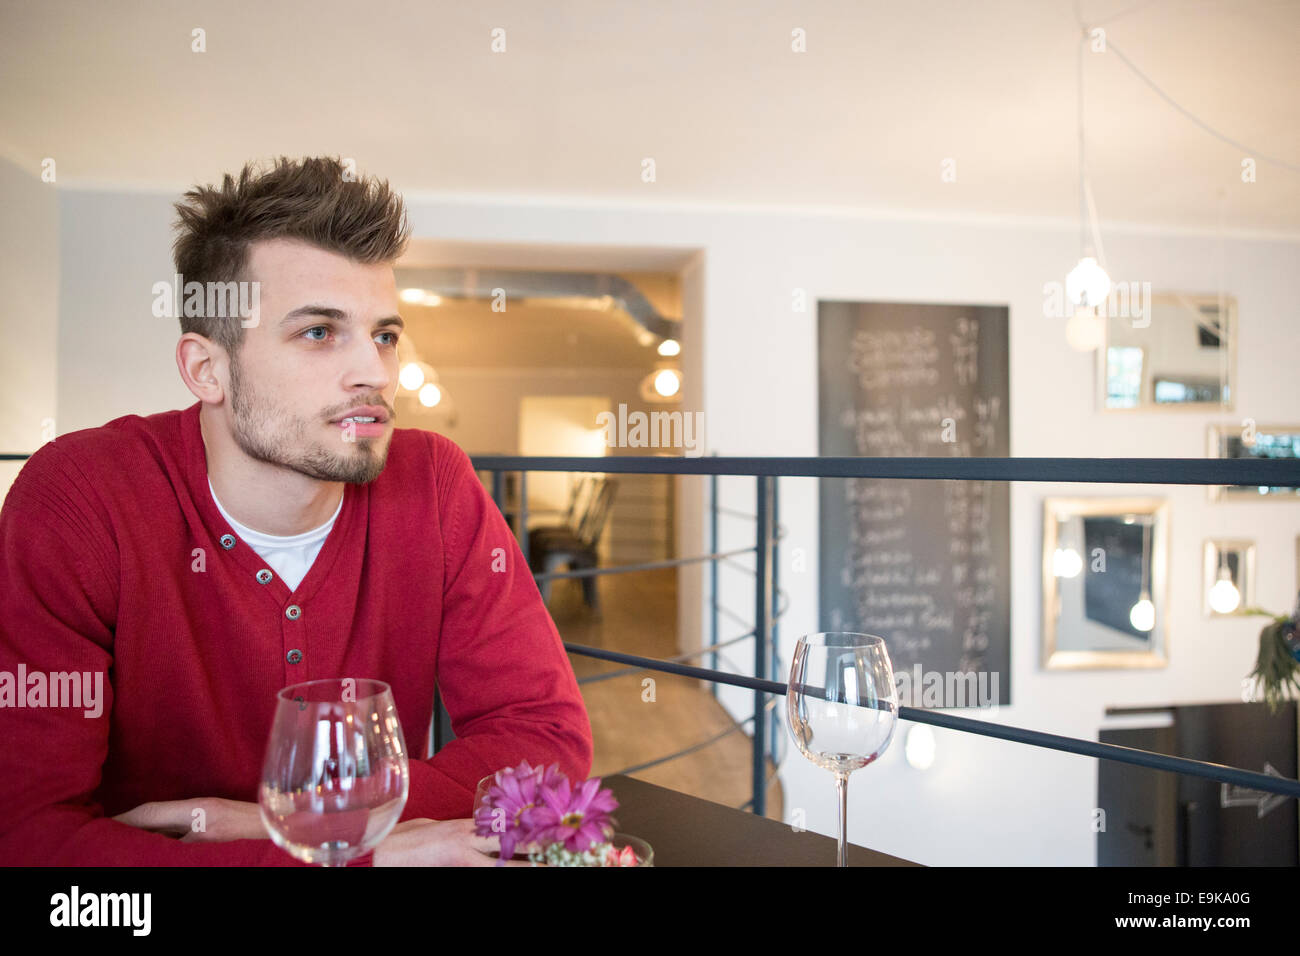 Thoughtful man looking away in cafe Stock Photo